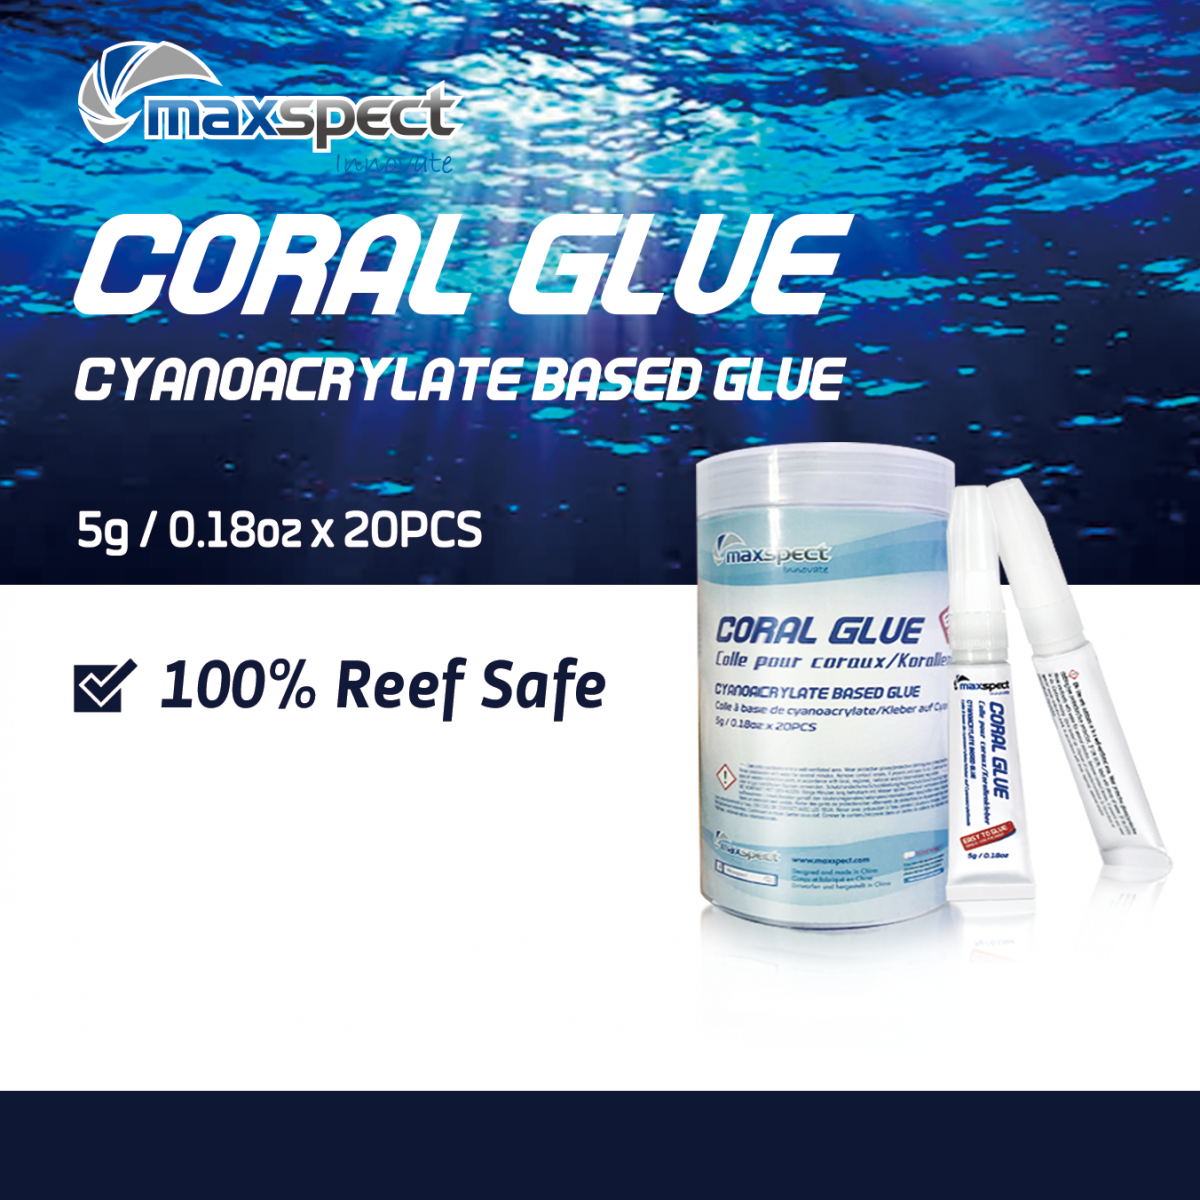 maxs_coral glue_package_banner